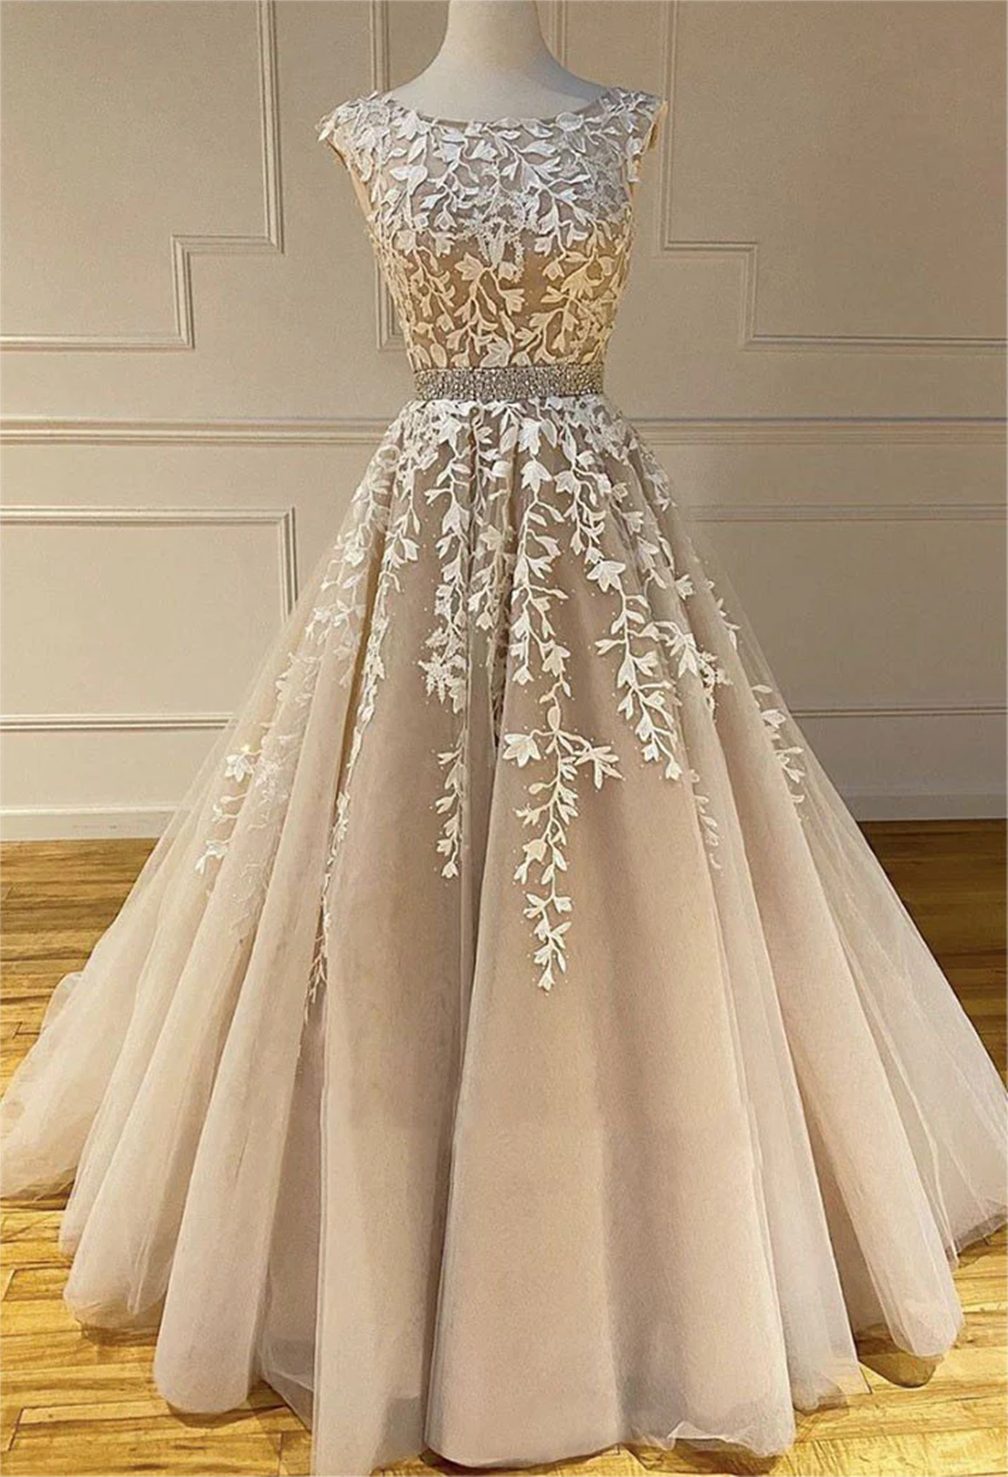 Women A-line Tulle Lace Prom Dresses Long Appliques Evening Party Gowns Sleeveless Formal Dress Yp103